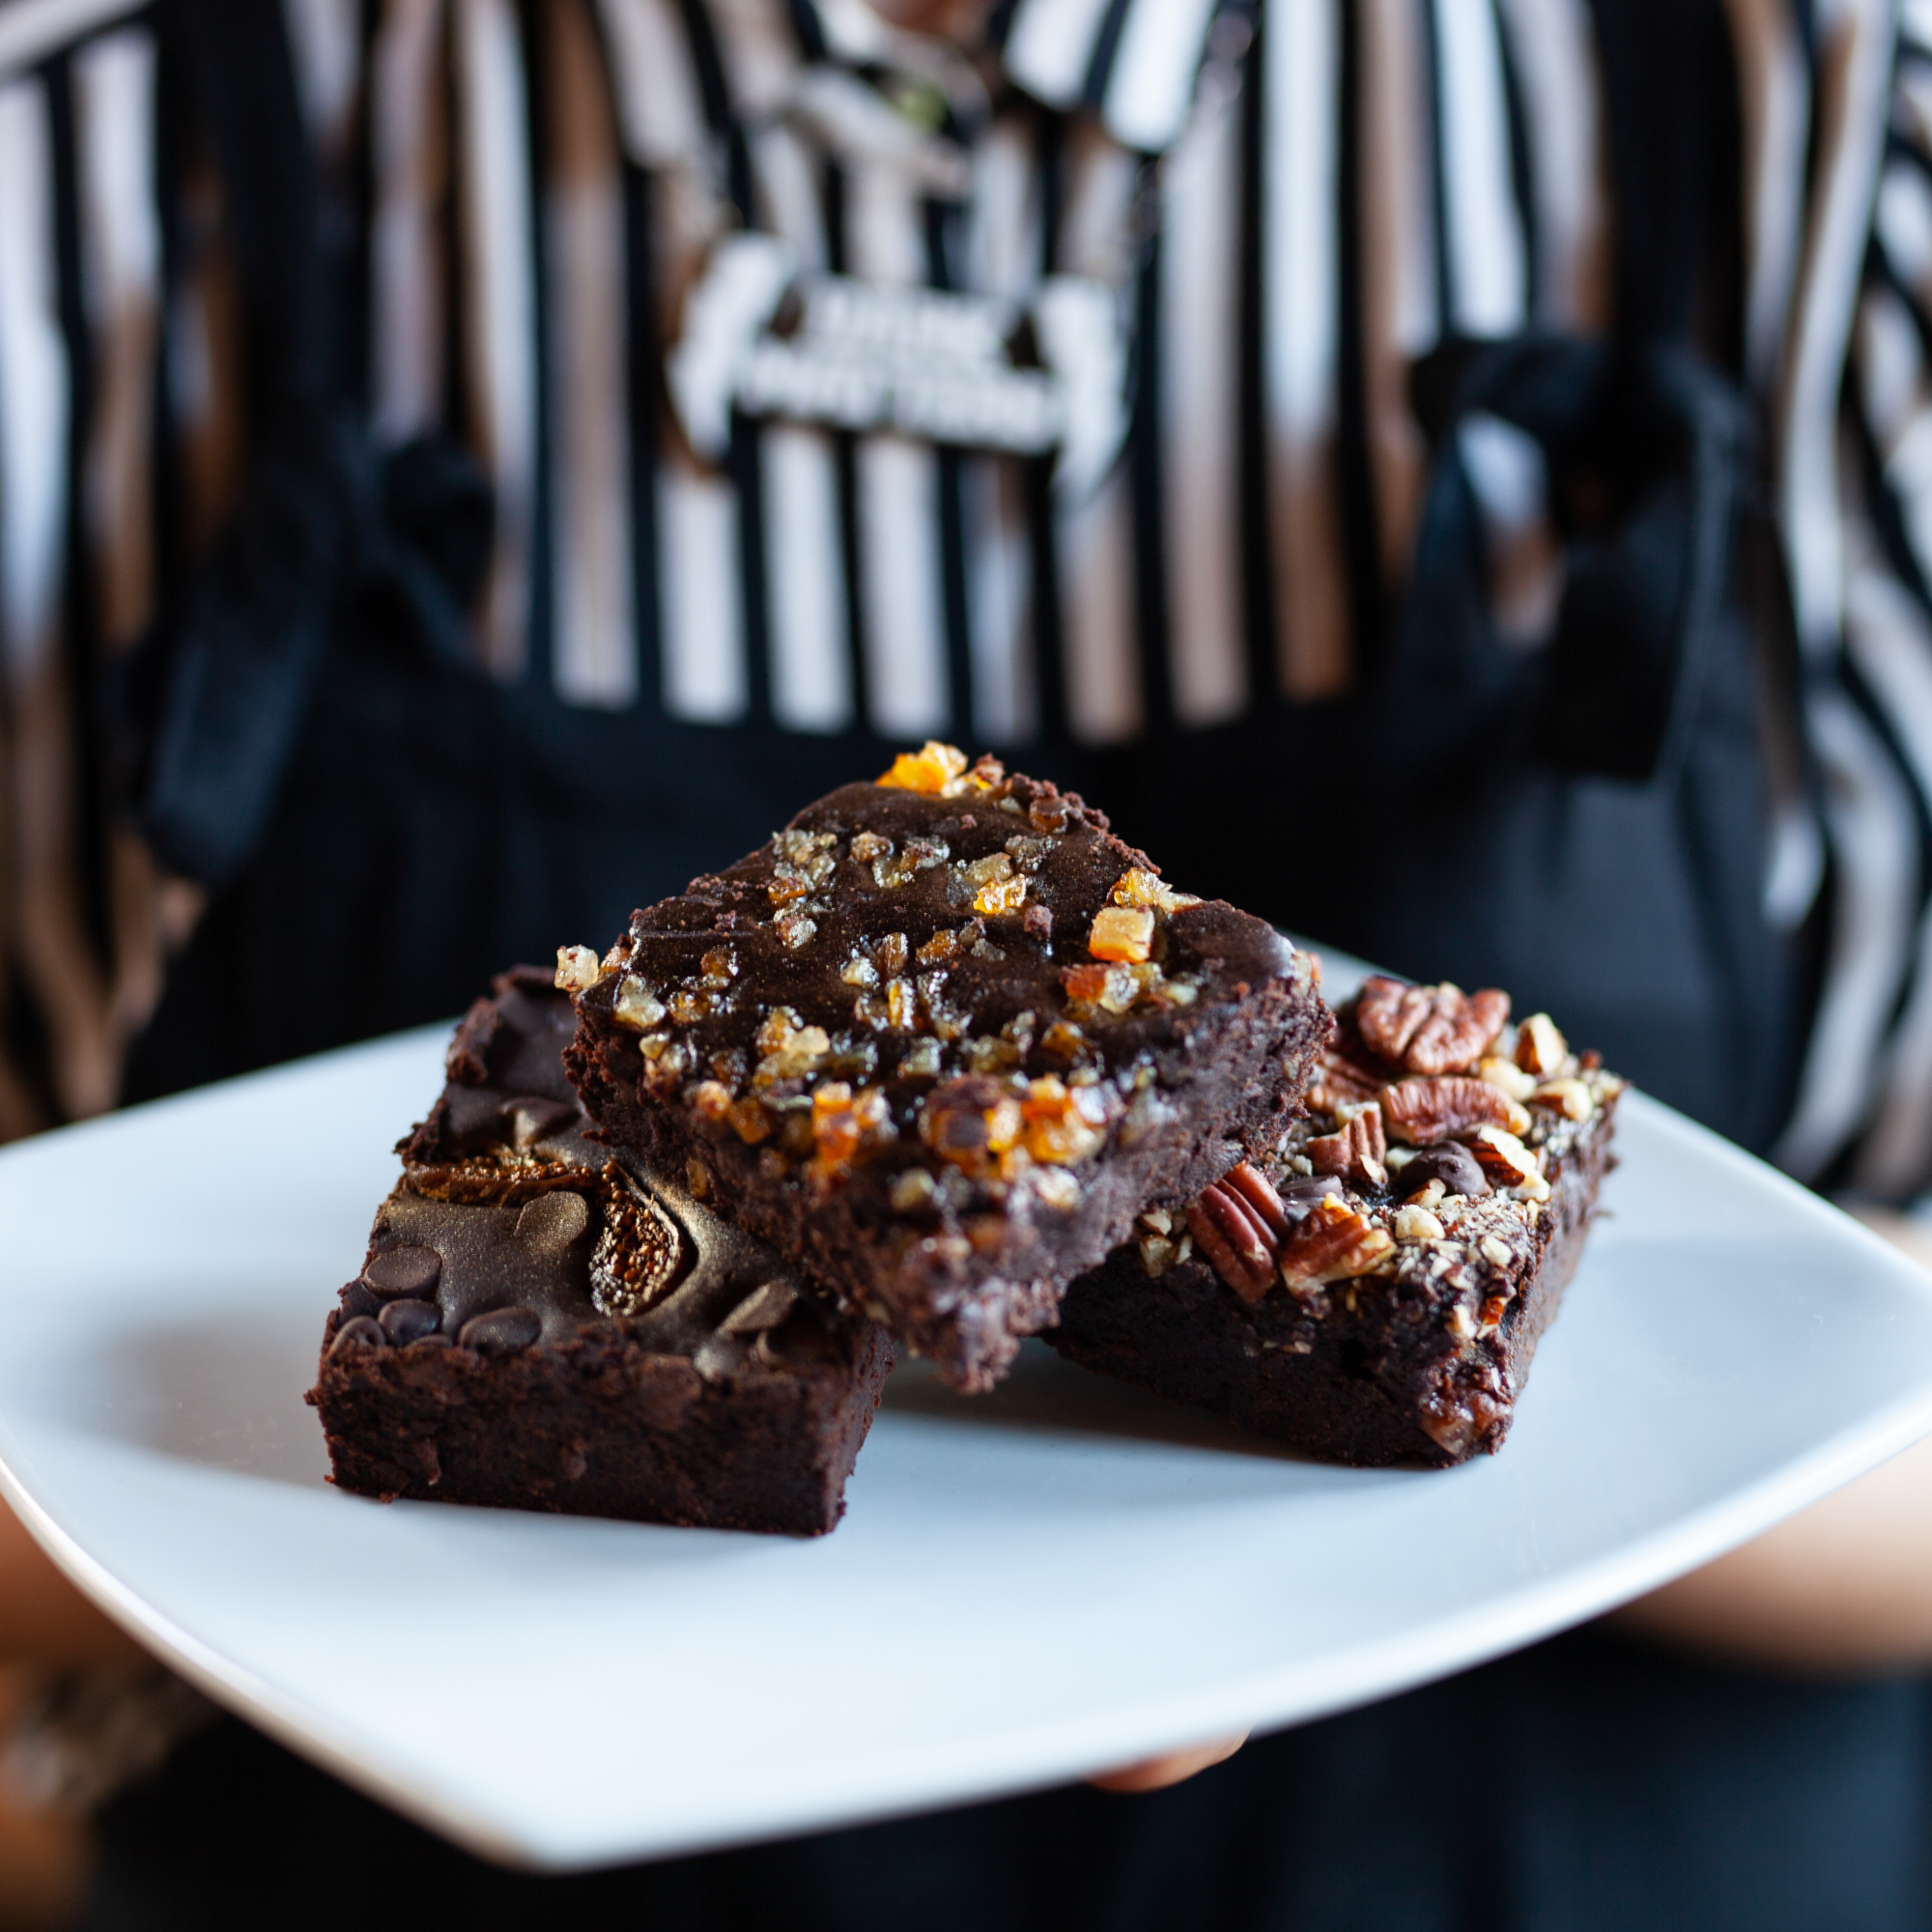 Plate of Three Vegan Brownies Held by Woman in Striped Shirt and Apron